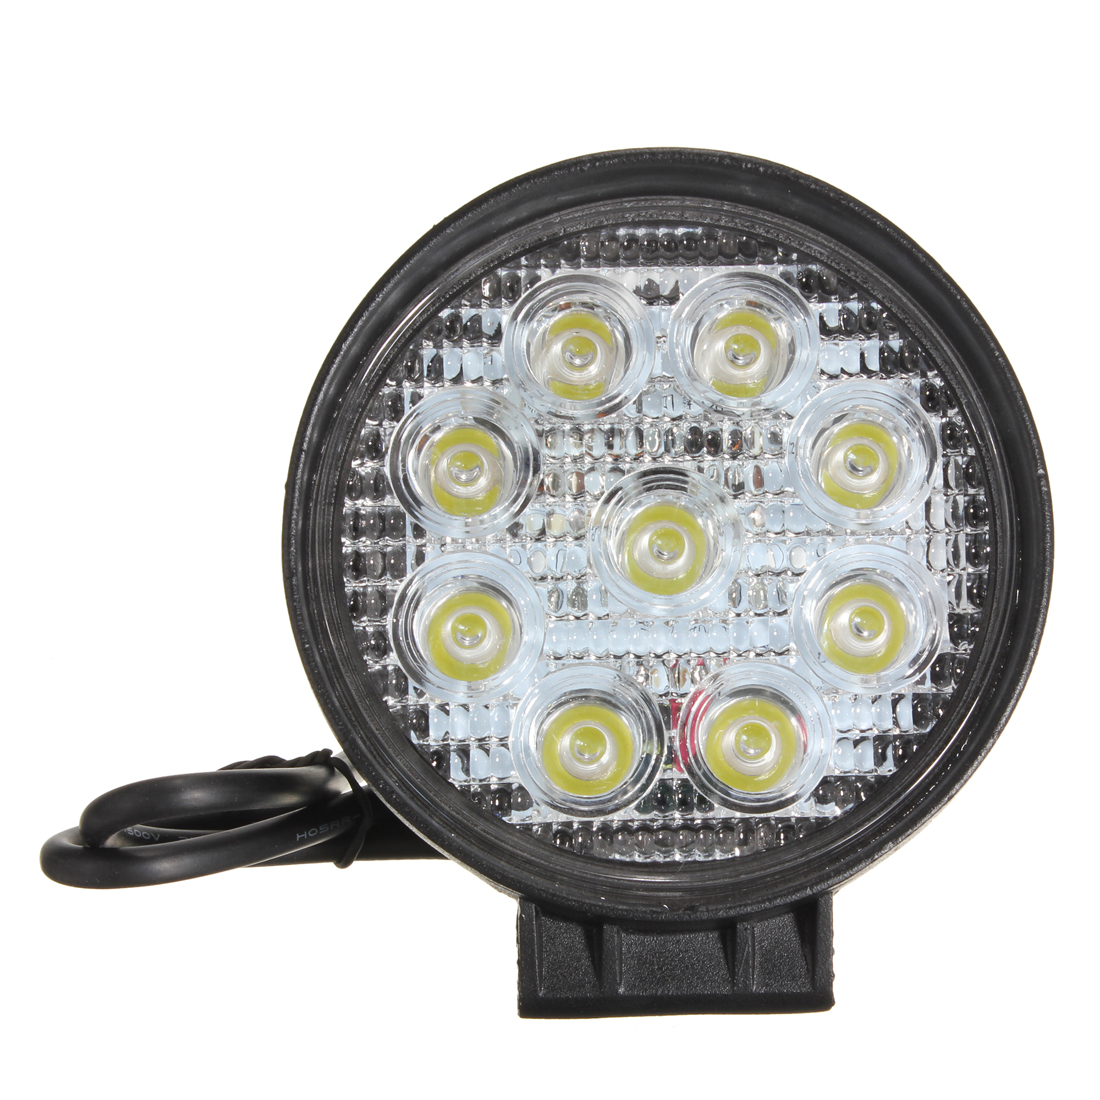 7"In 320W CREE LED Round Driving Light Spot Beam Work Headlight Bumper Off Road